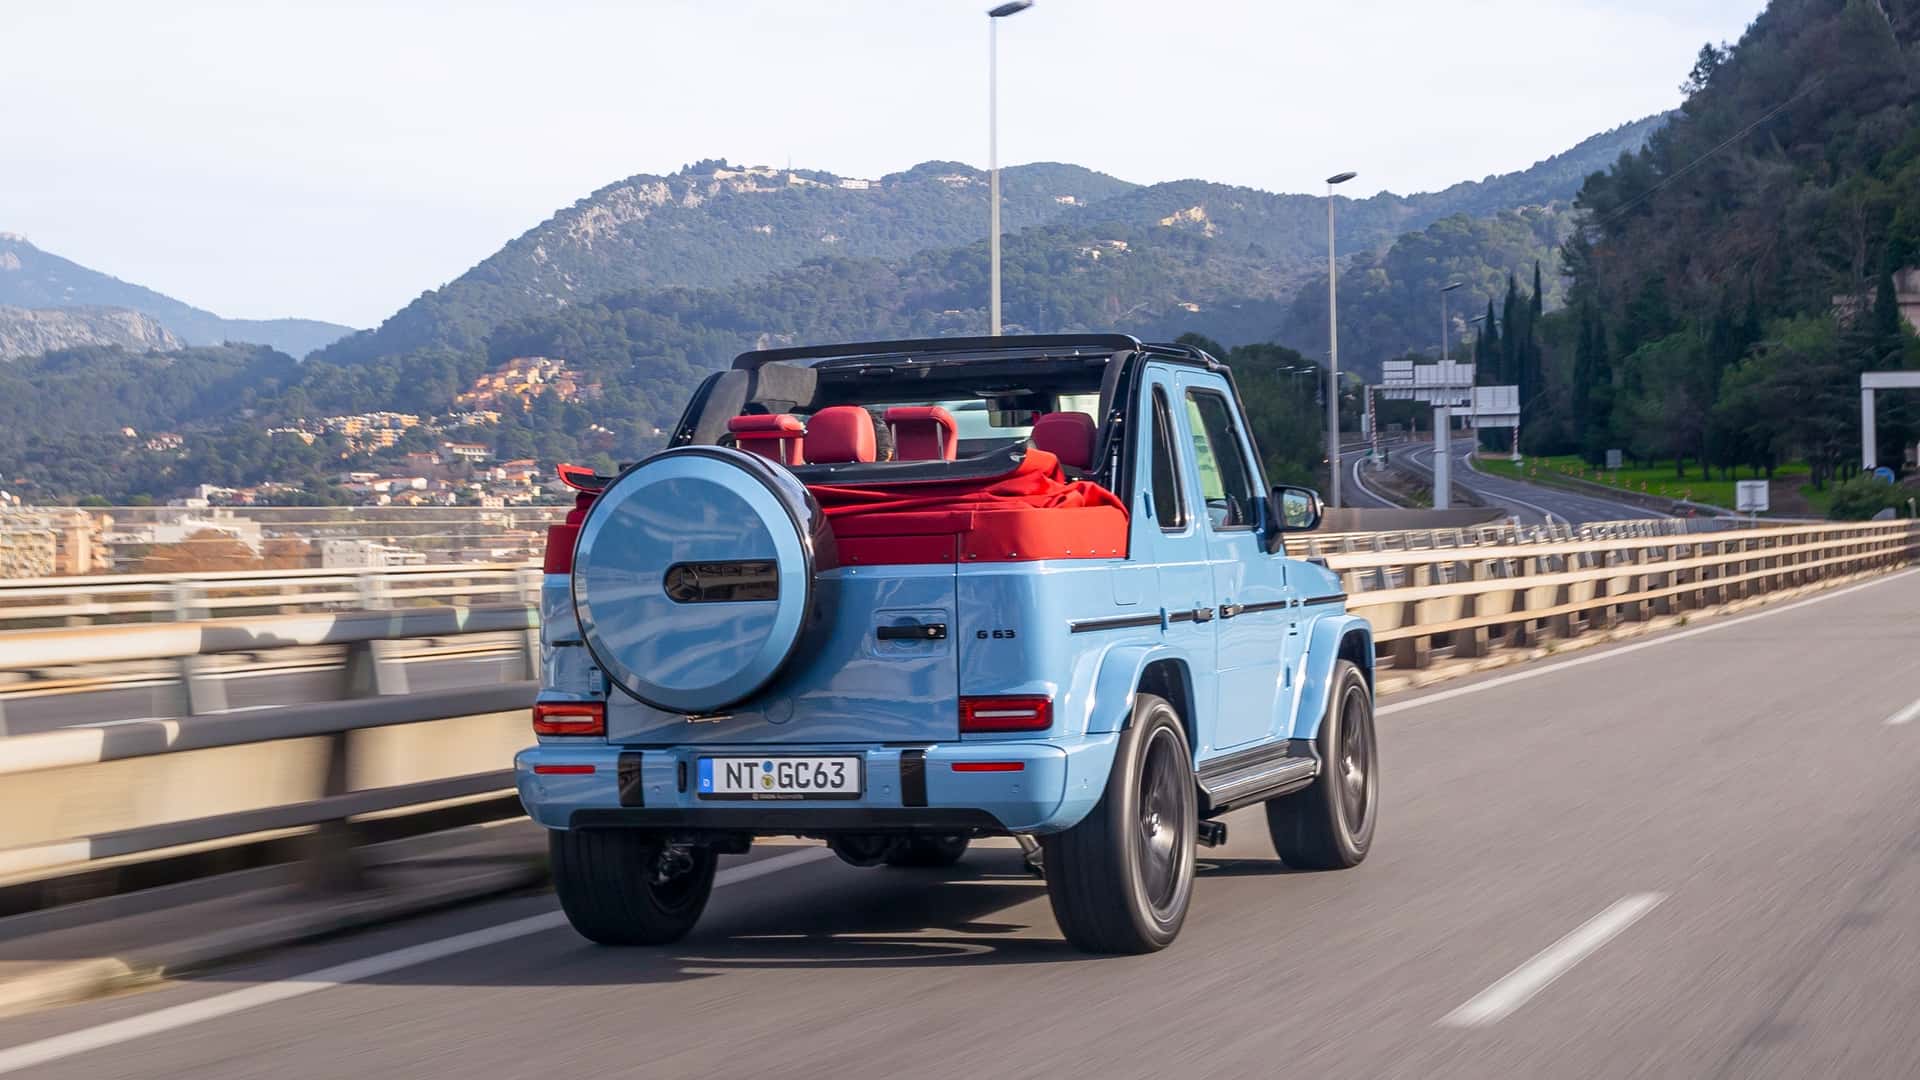 the-13-million-mercedes-benz-g-class-is-convertible-and-has-suicide-doors_1.jpg